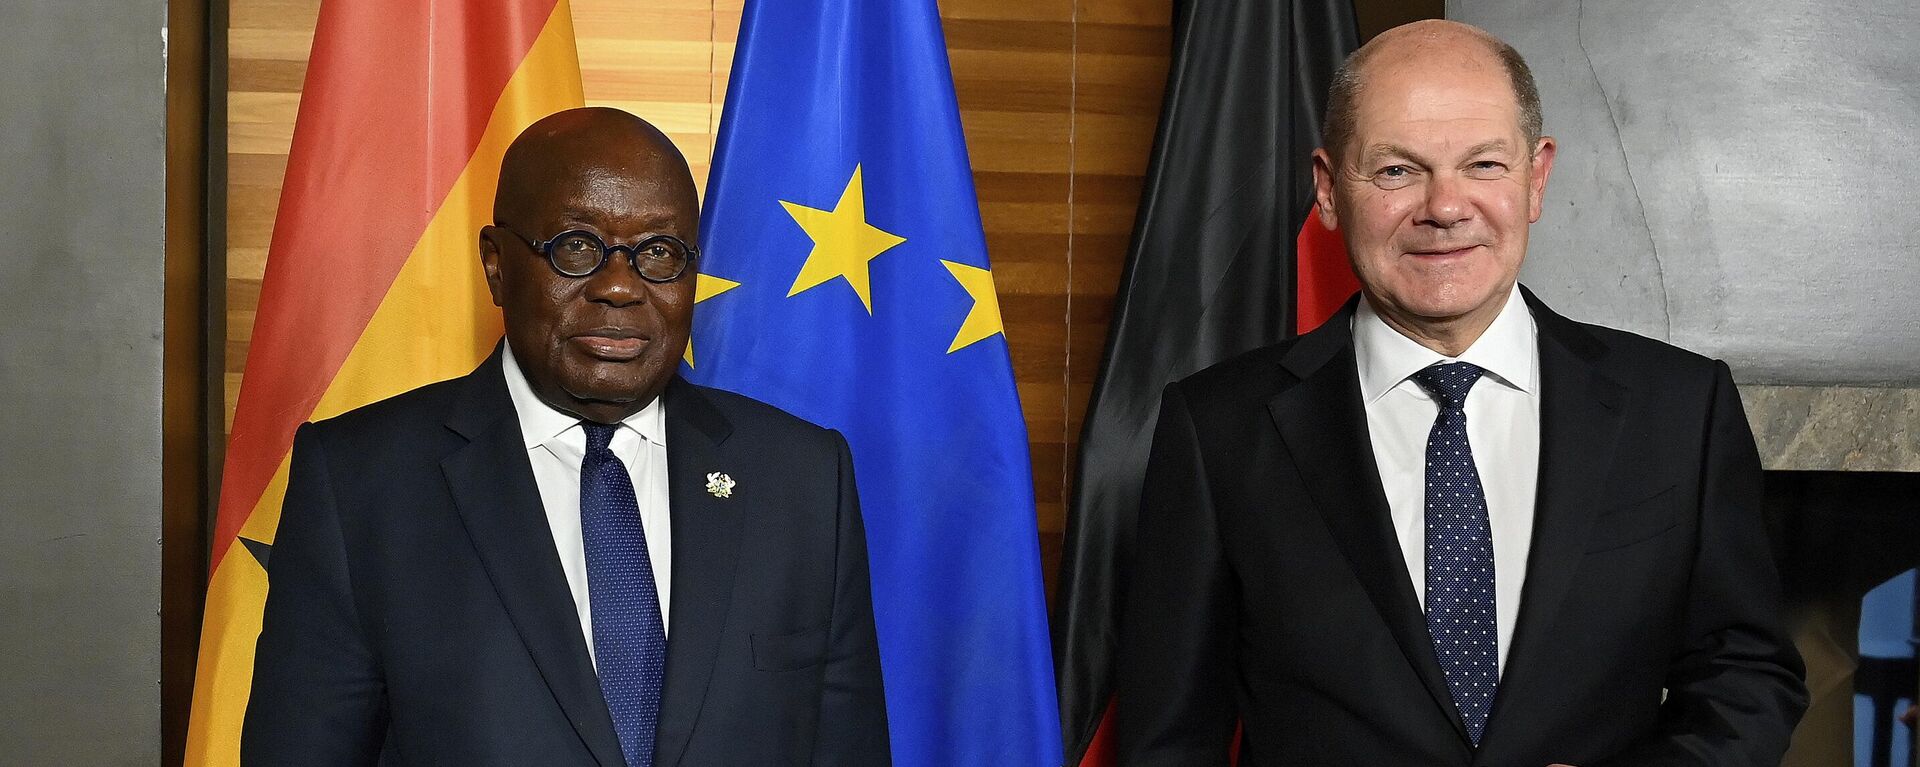 Ghana's President Nana Addo Dankwa Akufo-Addo, left, and German Chancellor Olaf Scholz, right, pose for a photo prior to a bilateral meeting at the Munich Security Conference in Munich, Germany, Friday, Feb. 17, 2023.  - Sputnik Africa, 1920, 25.06.2023